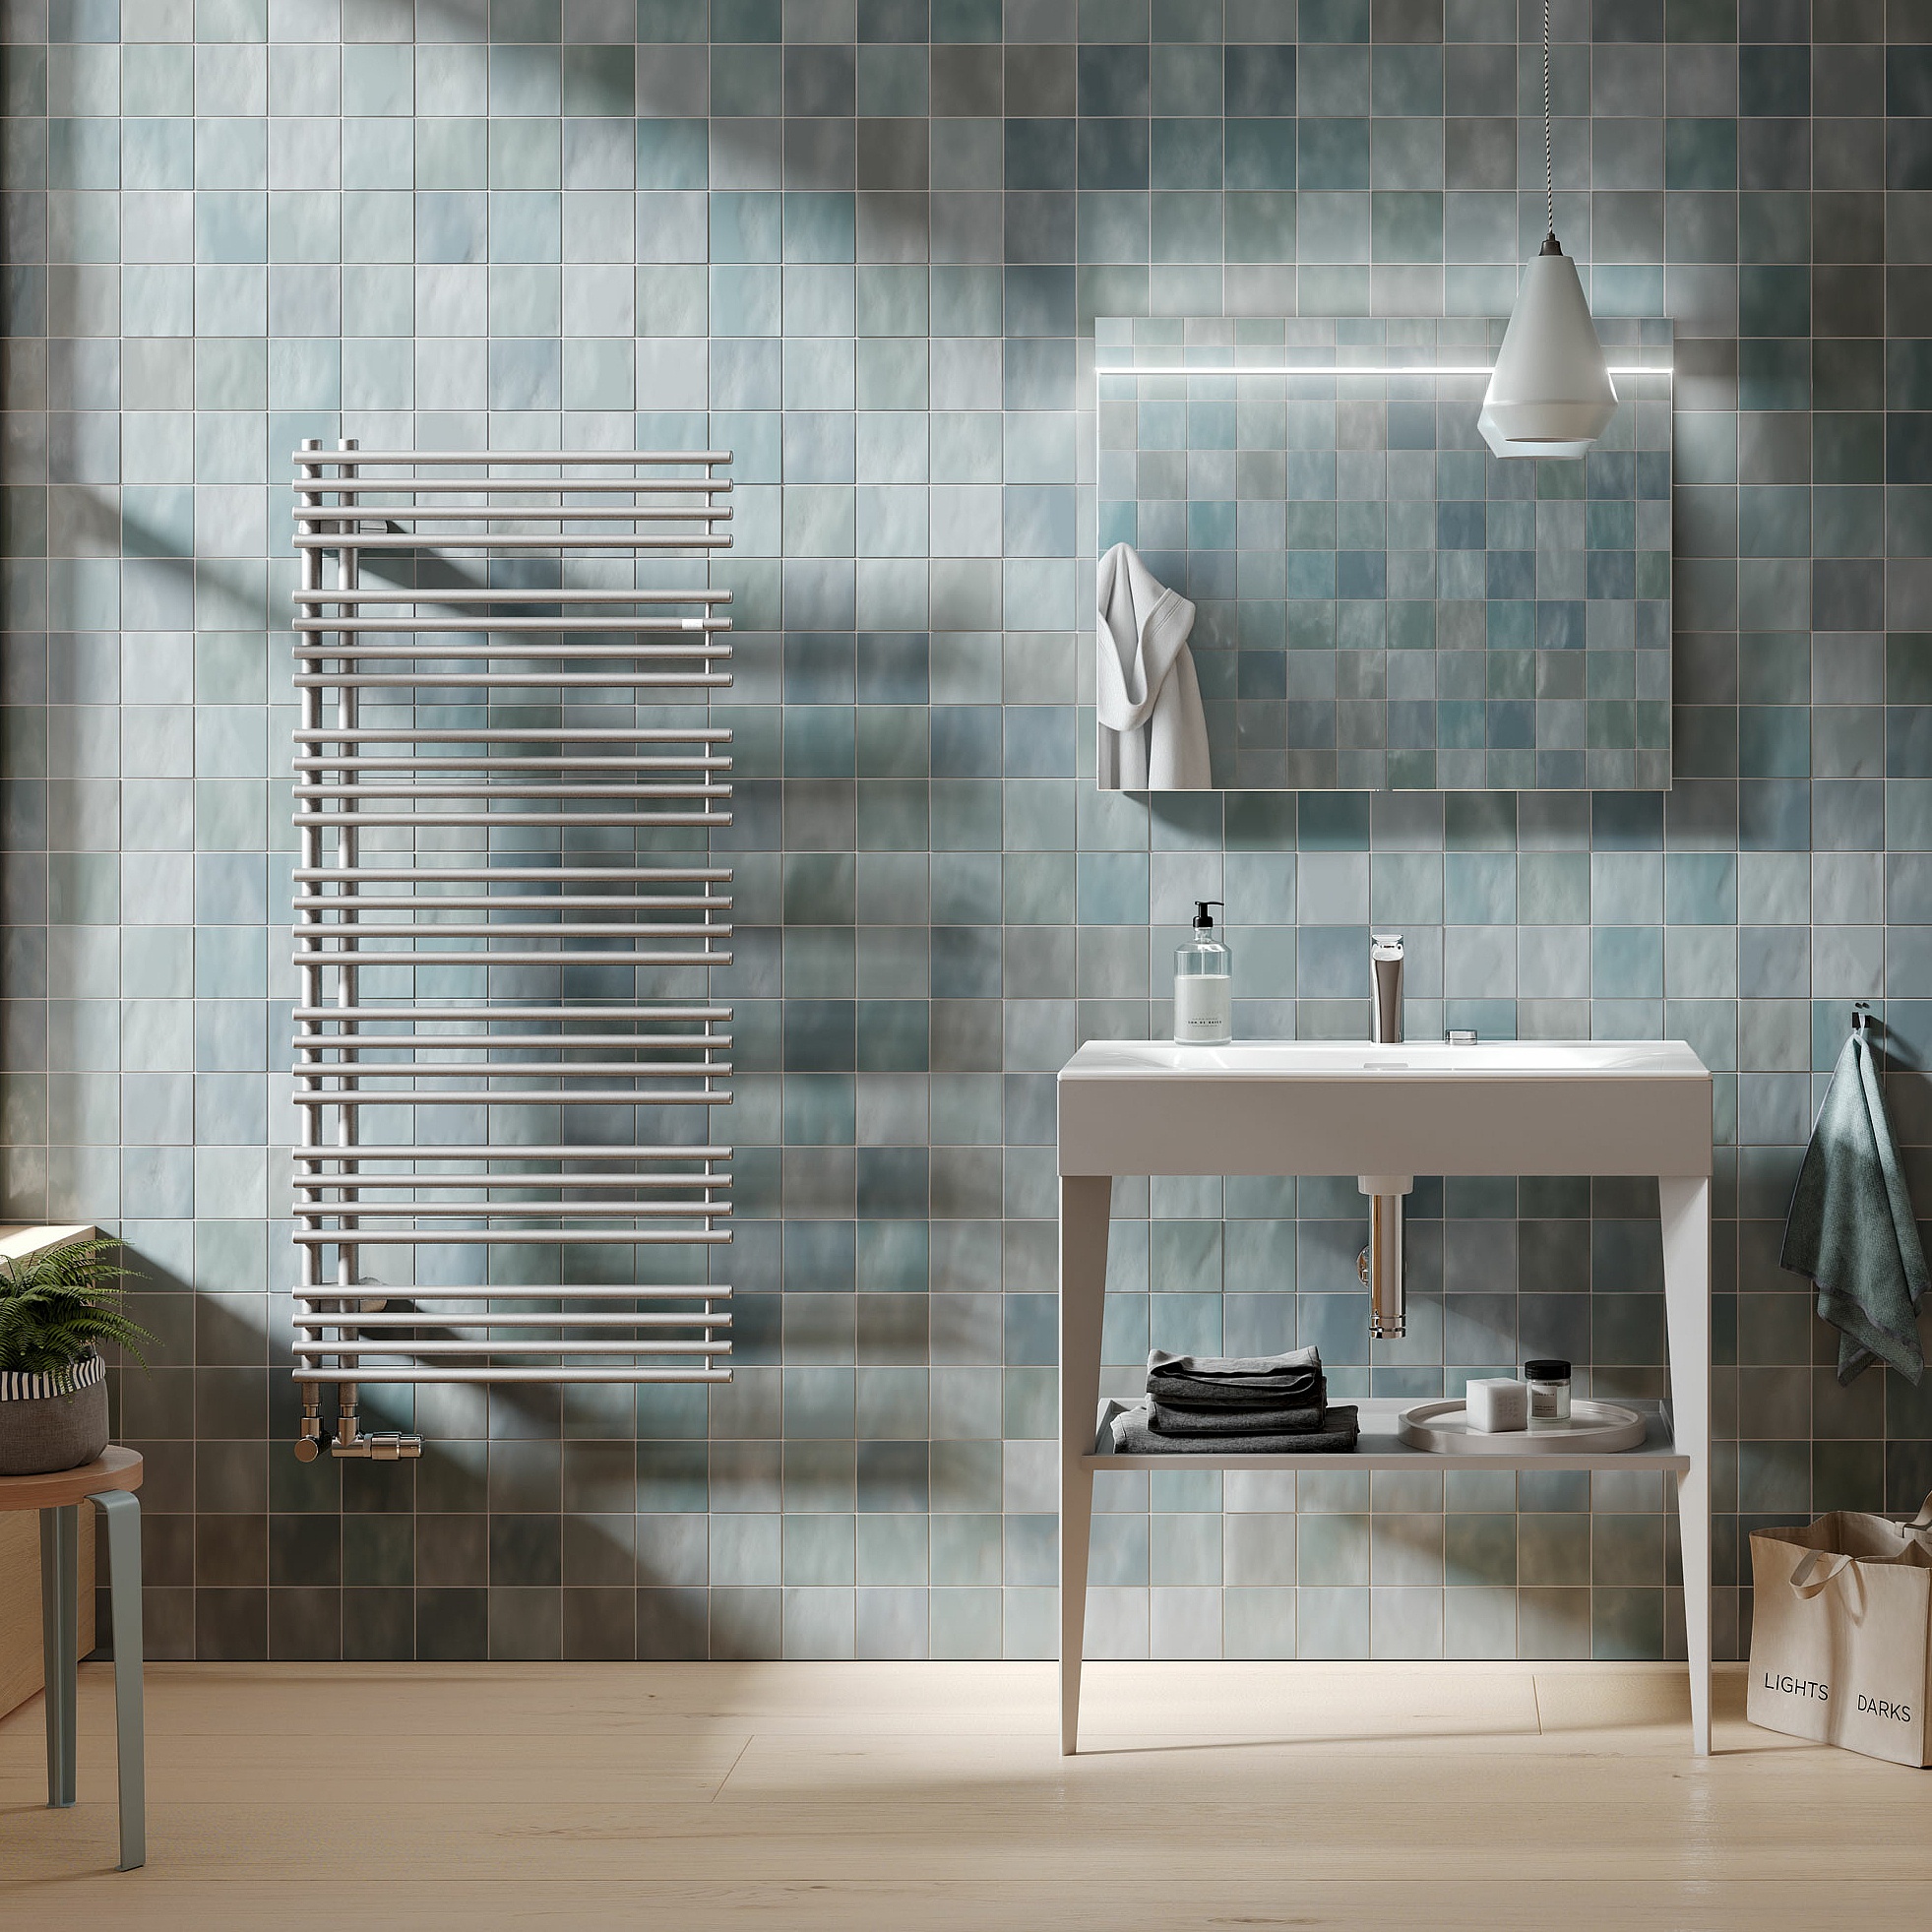 Kermi Diveo design and bathroom radiators – functionality and comfort rolled into one.